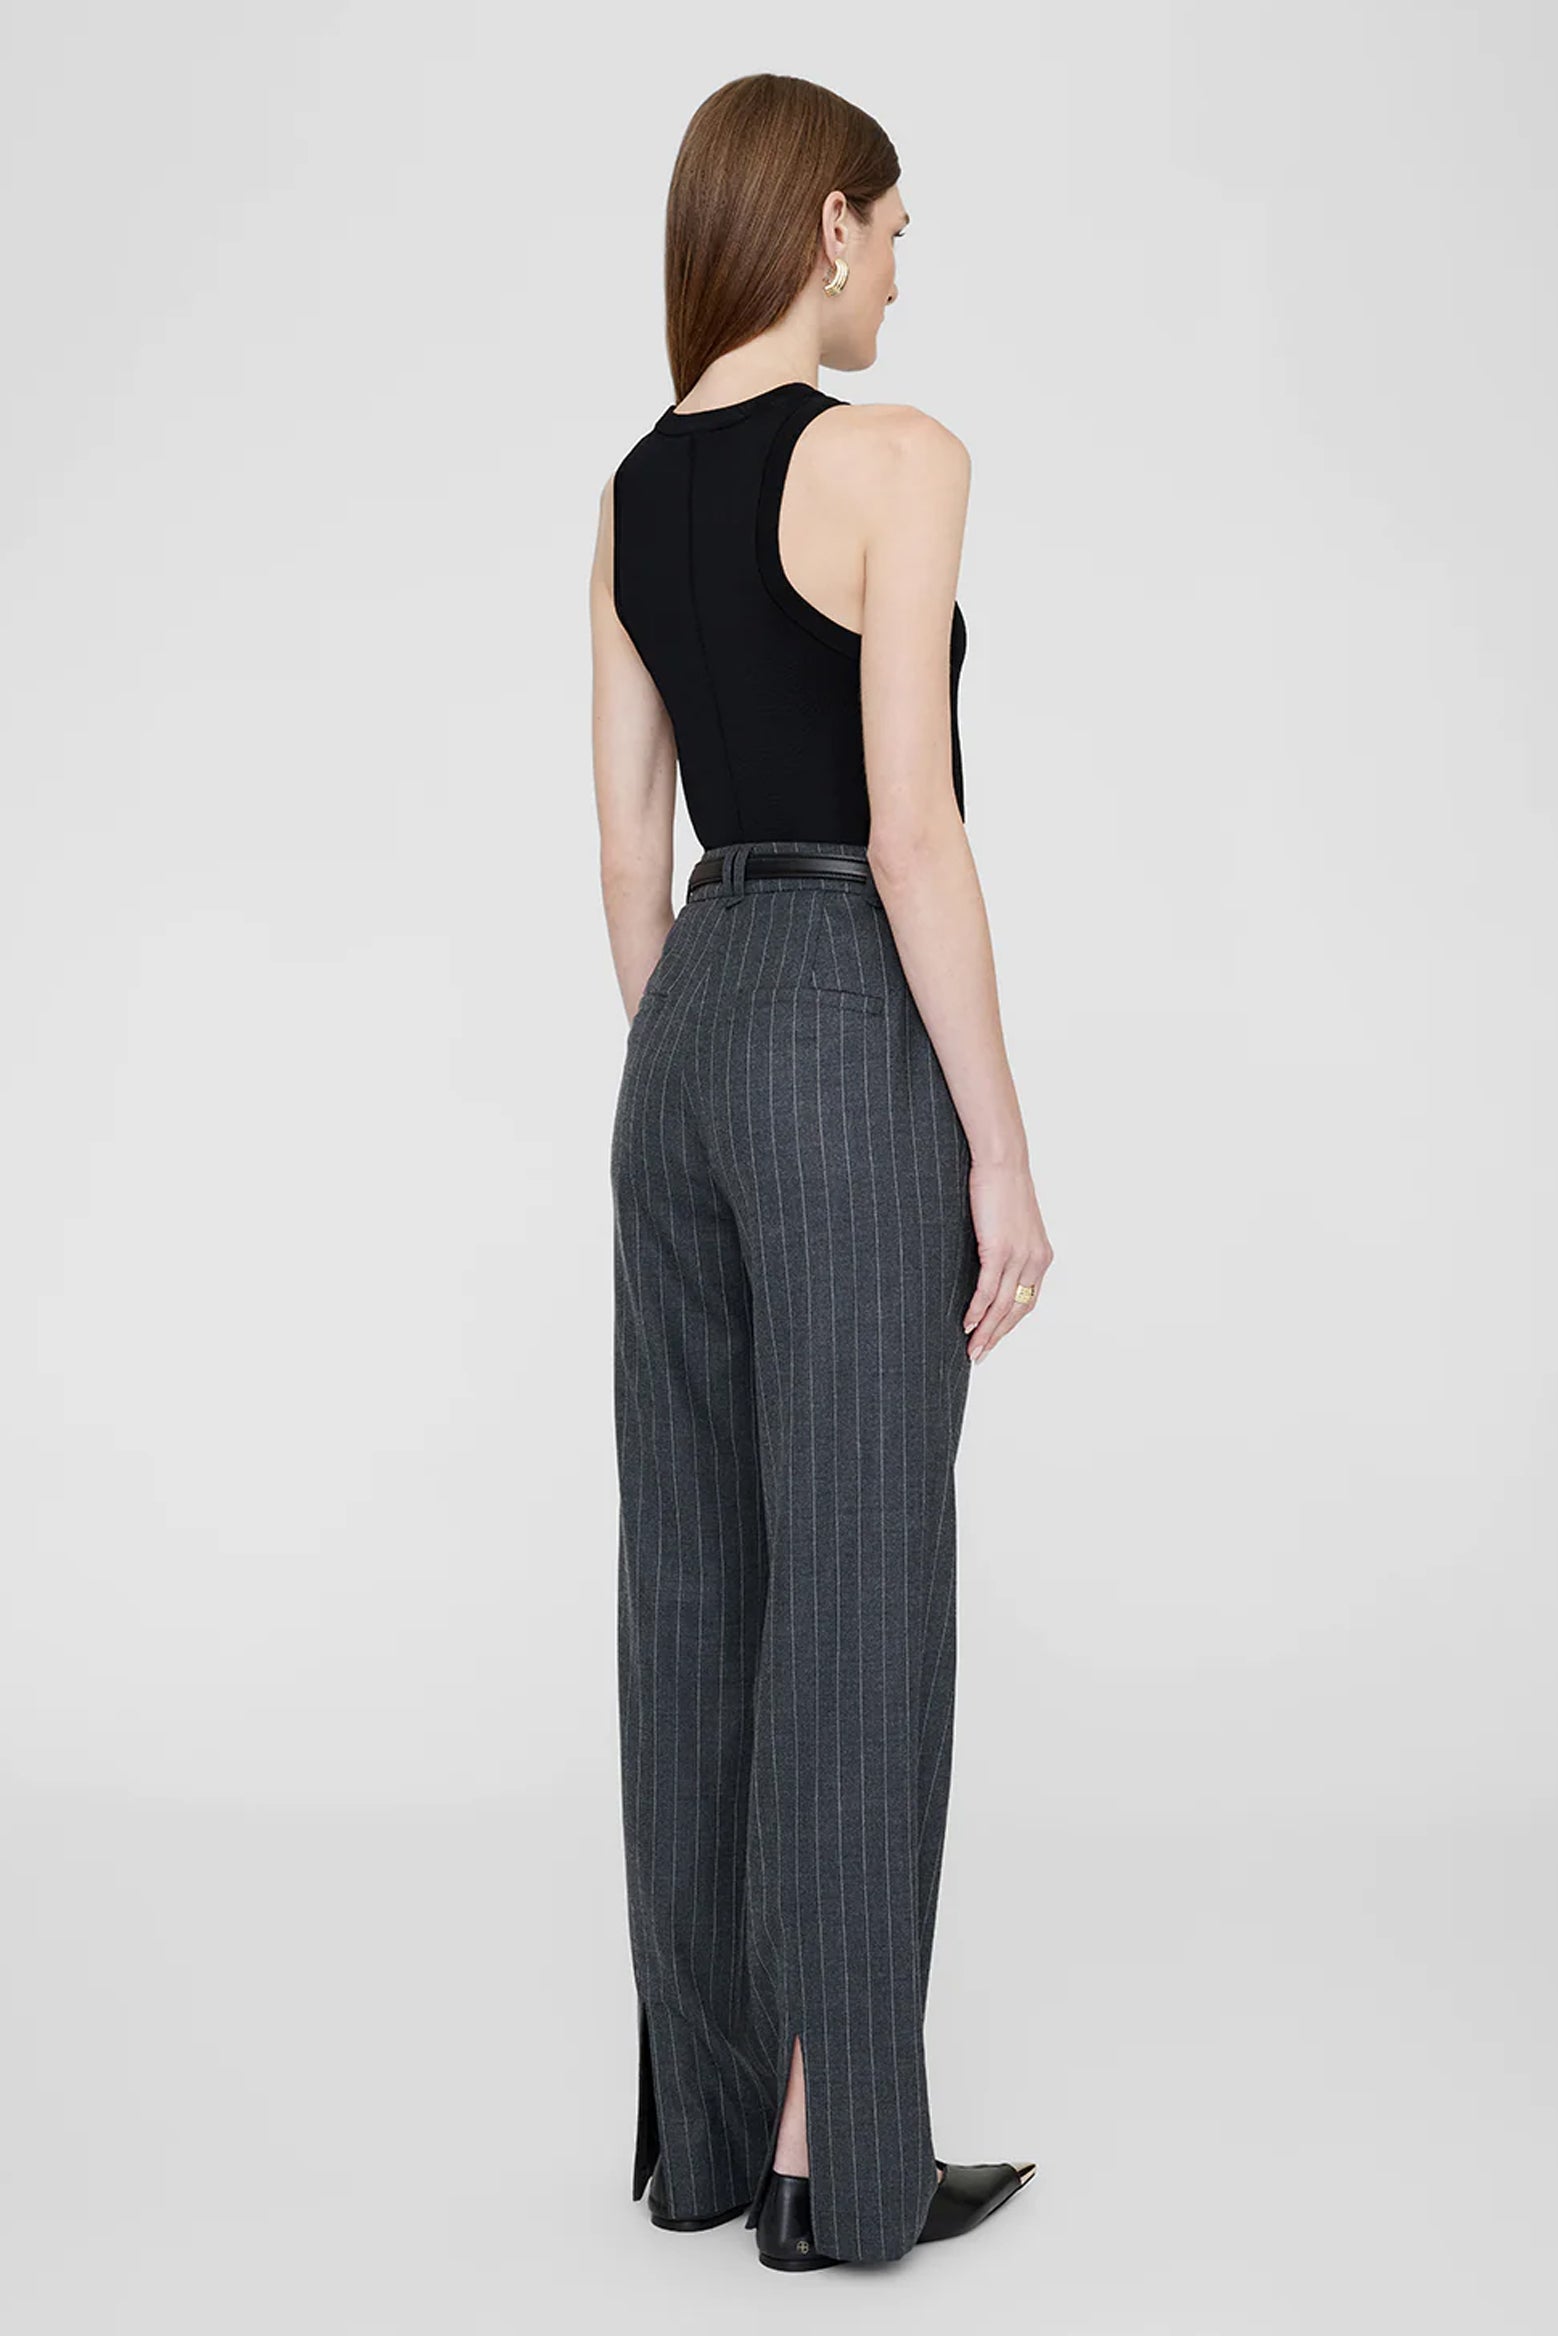 Anine Bing Drew Pant in Grey Pinstripe available at The New Trend Australia.